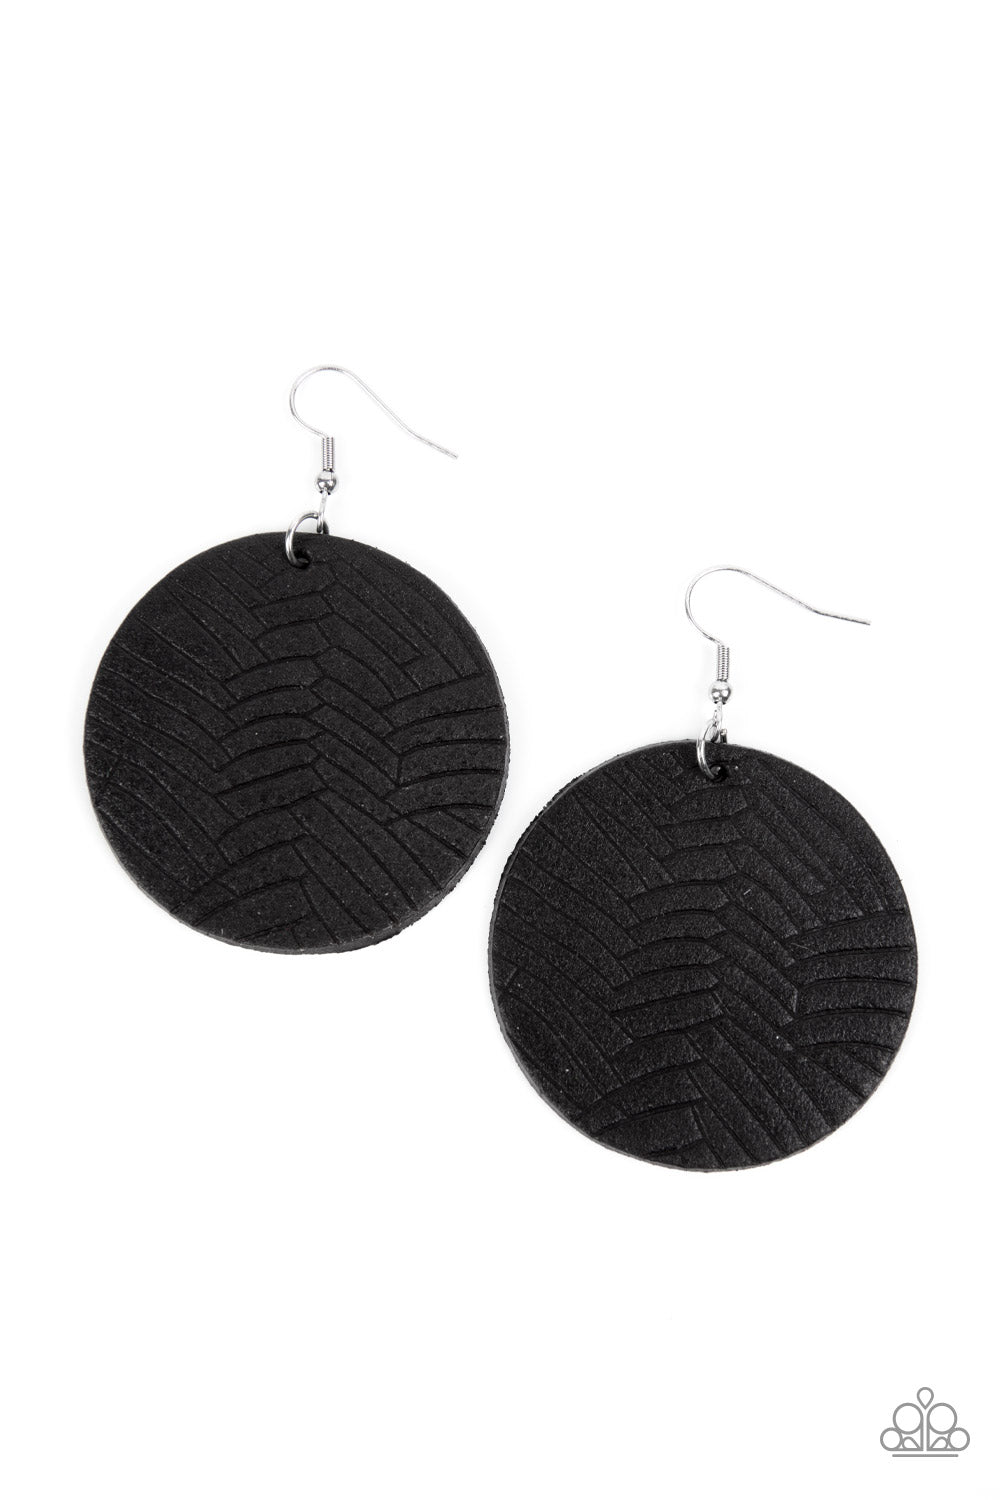 Leathery Loungewear - Black Earrings - Paparazzi Accessories - Etched in layers of geometric detail, a black leather disc swings from the ear for an authentically earthy look. Earring attaches to a standard fishhook fitting.